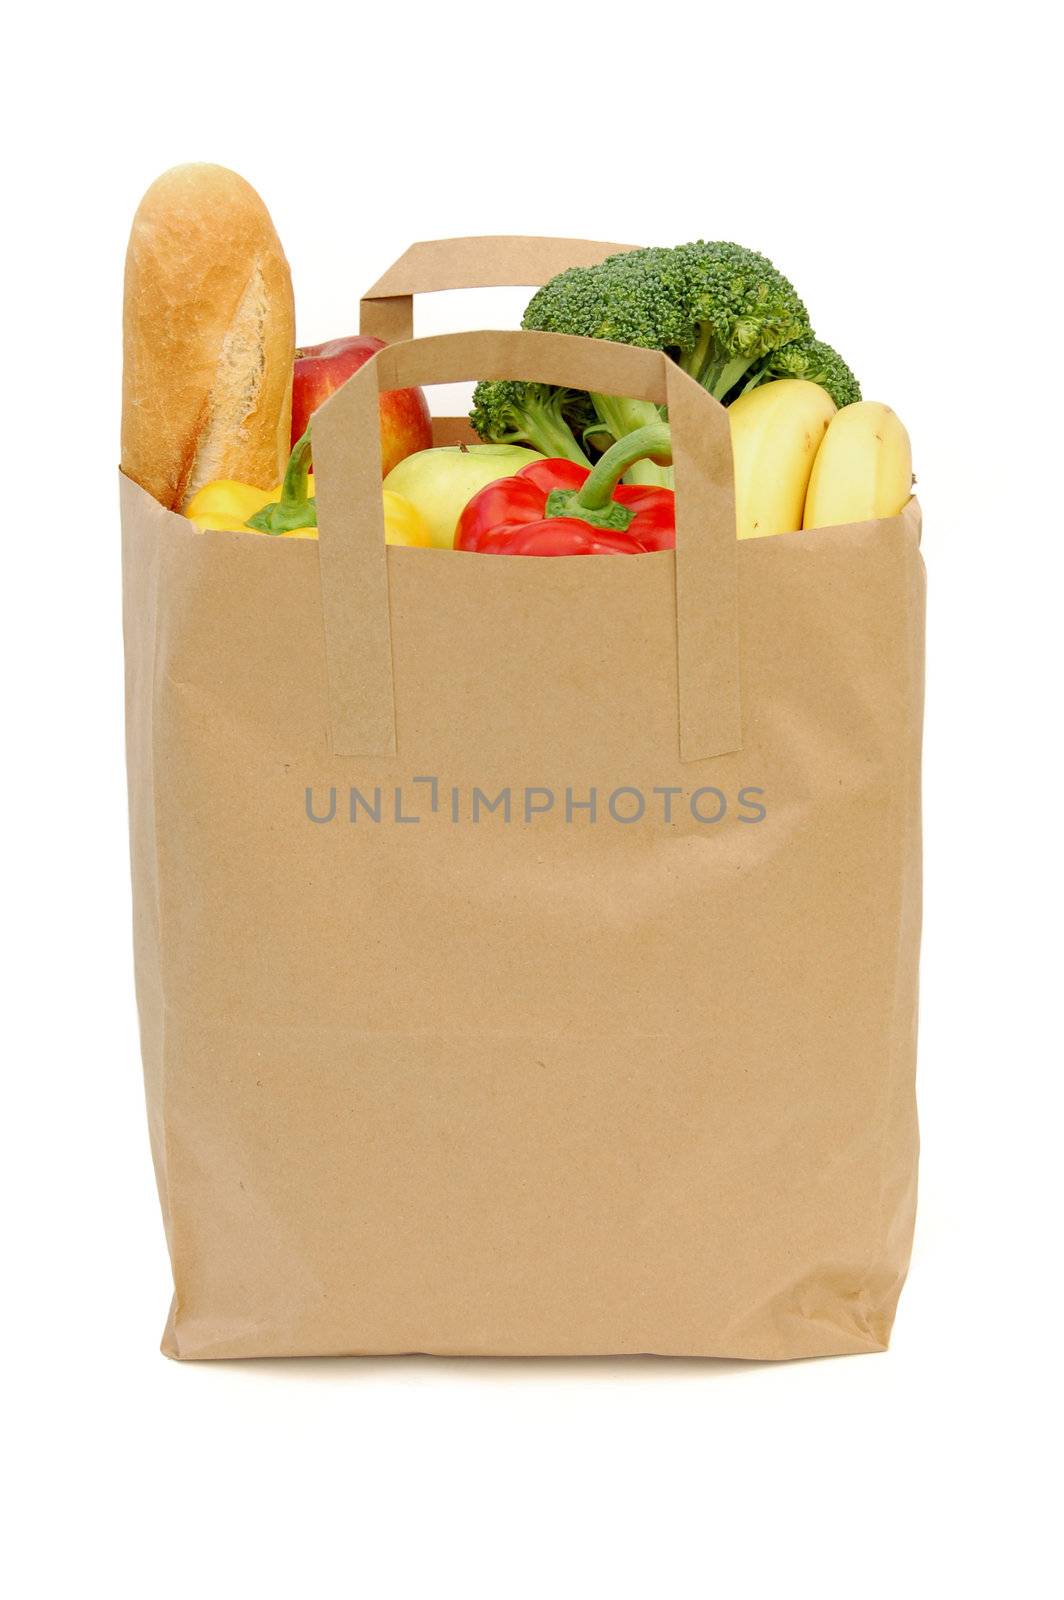 Brown bag with fruit, vegetables and a french loaf